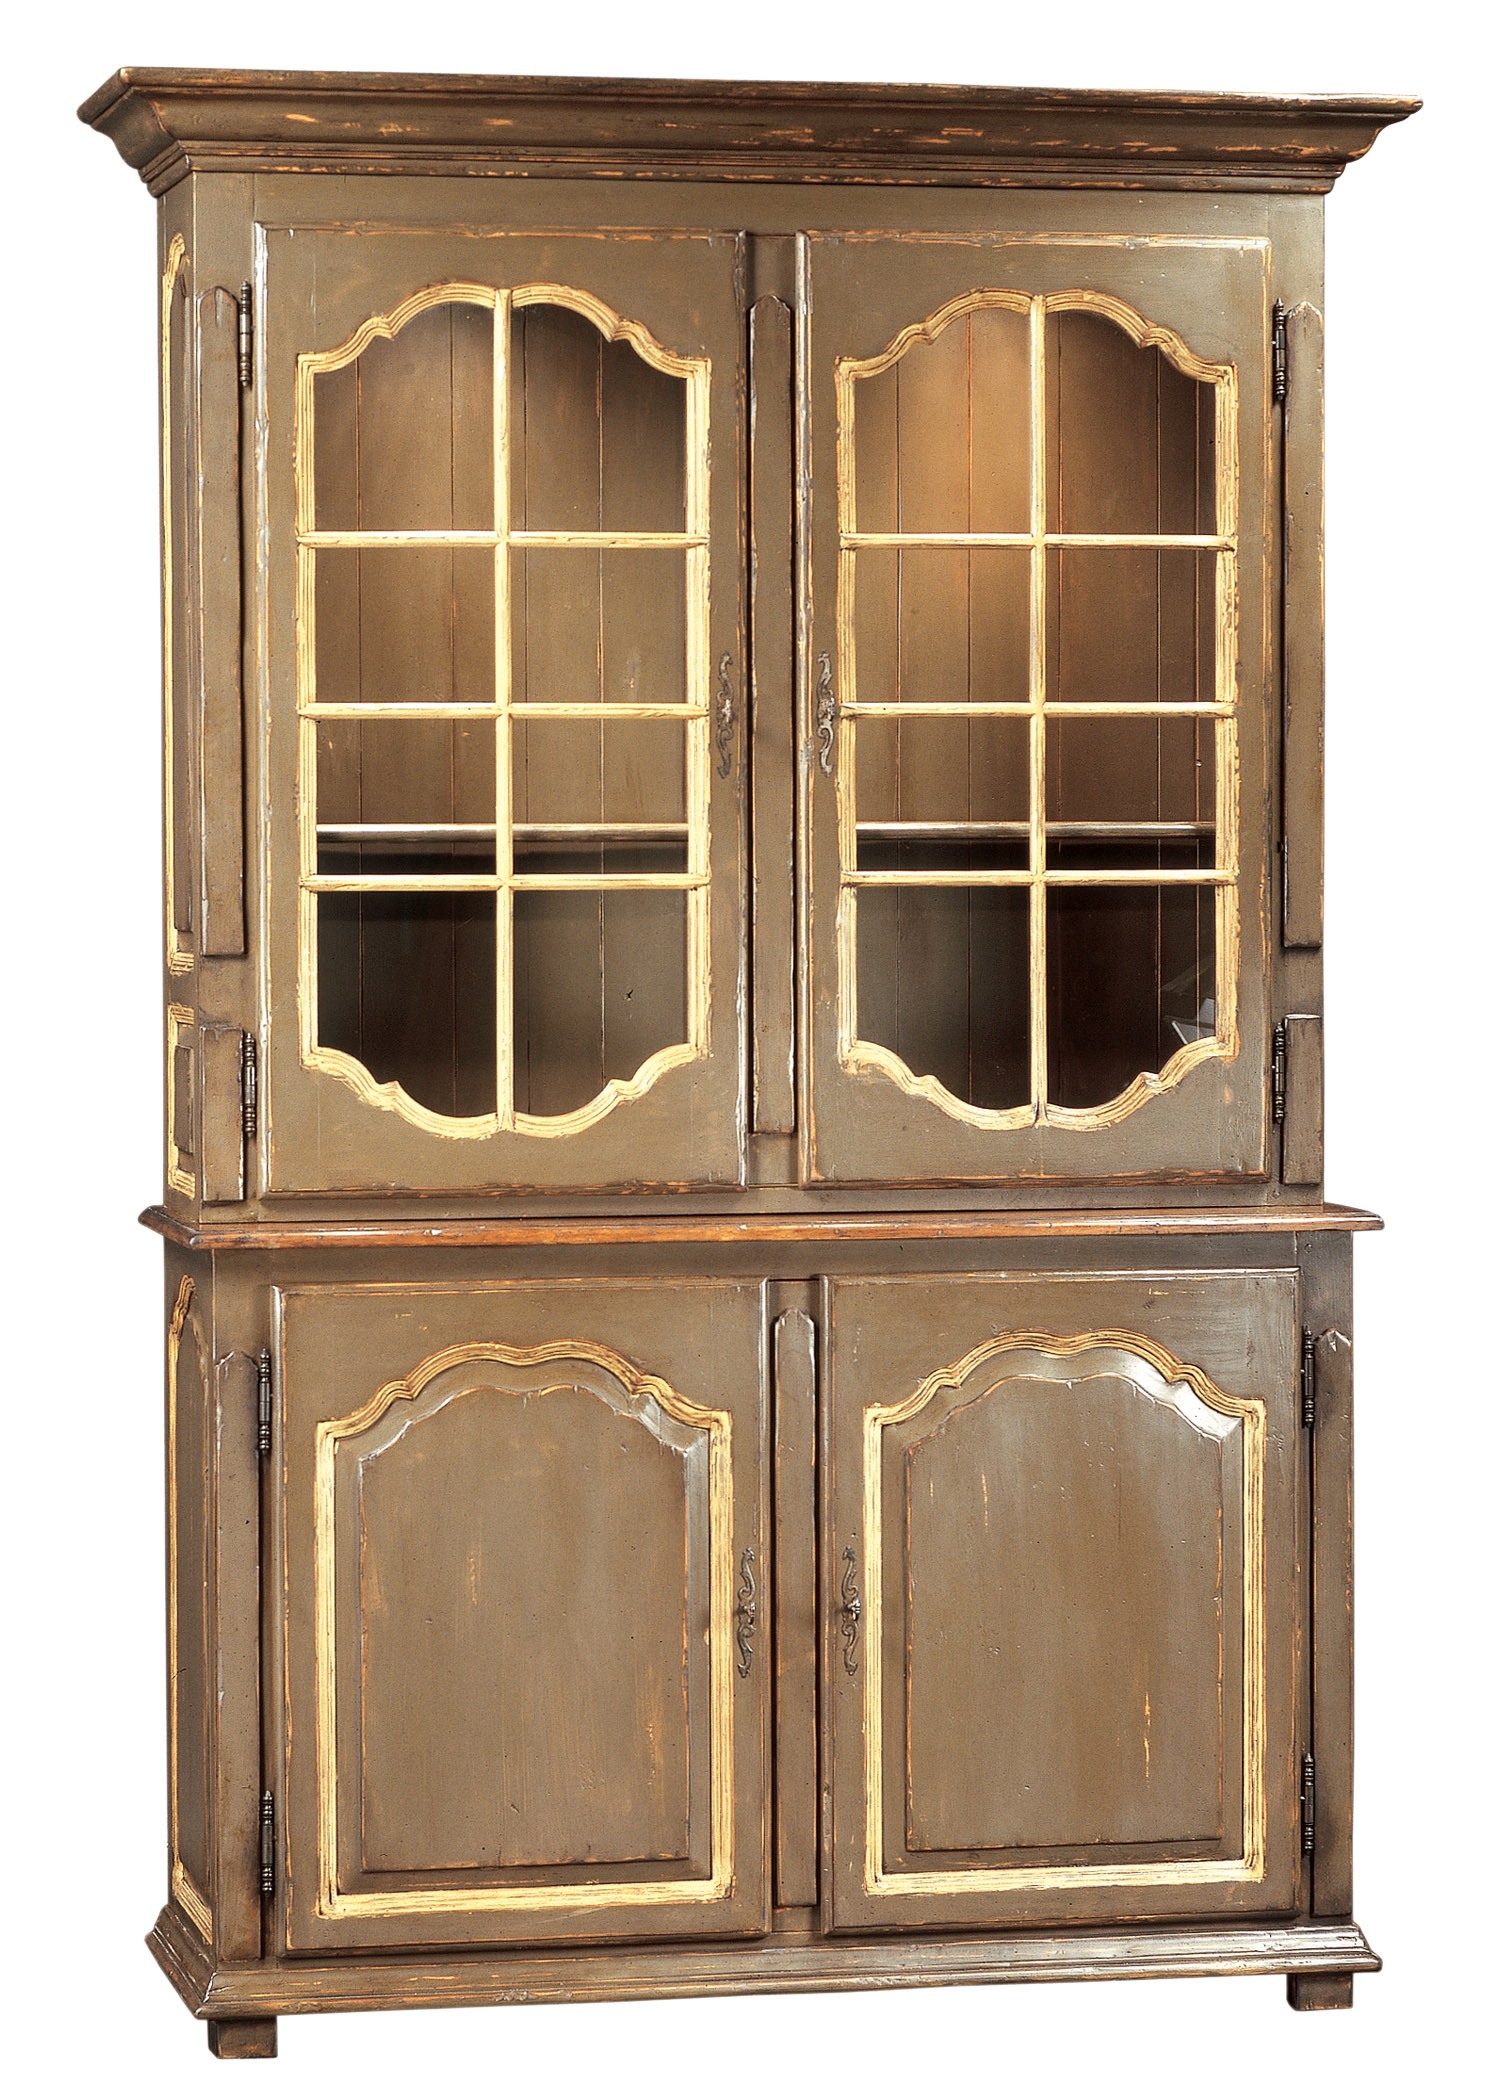 Harper traditional painted hutch and farmhouse cabinet by Woodland furniture in Idaho Falls